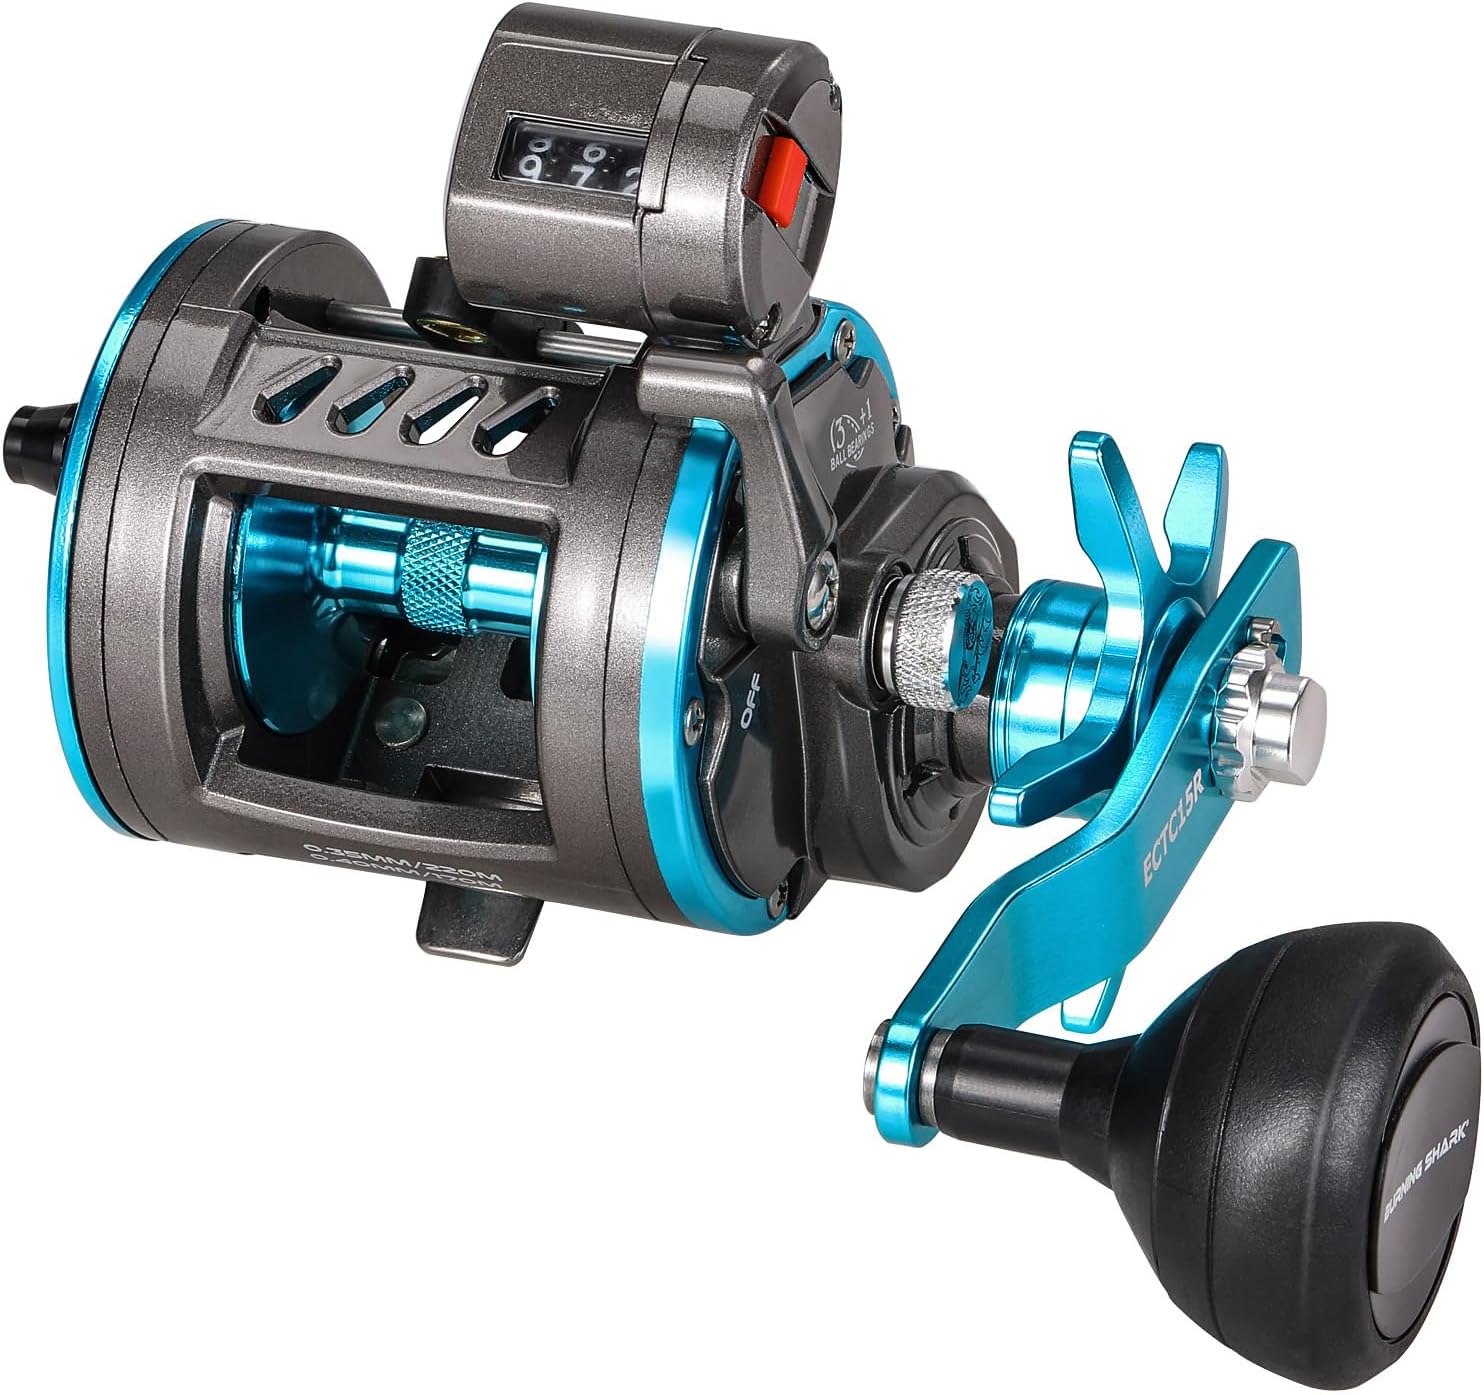 Burning Shark Baitcasting Fishing Reel, Smooth Powerful Round Baitcaster Reel, Saltwater Inshore Surf Trolling Reel, Conventional Reel for Catfish, Musky, Bass, Pike